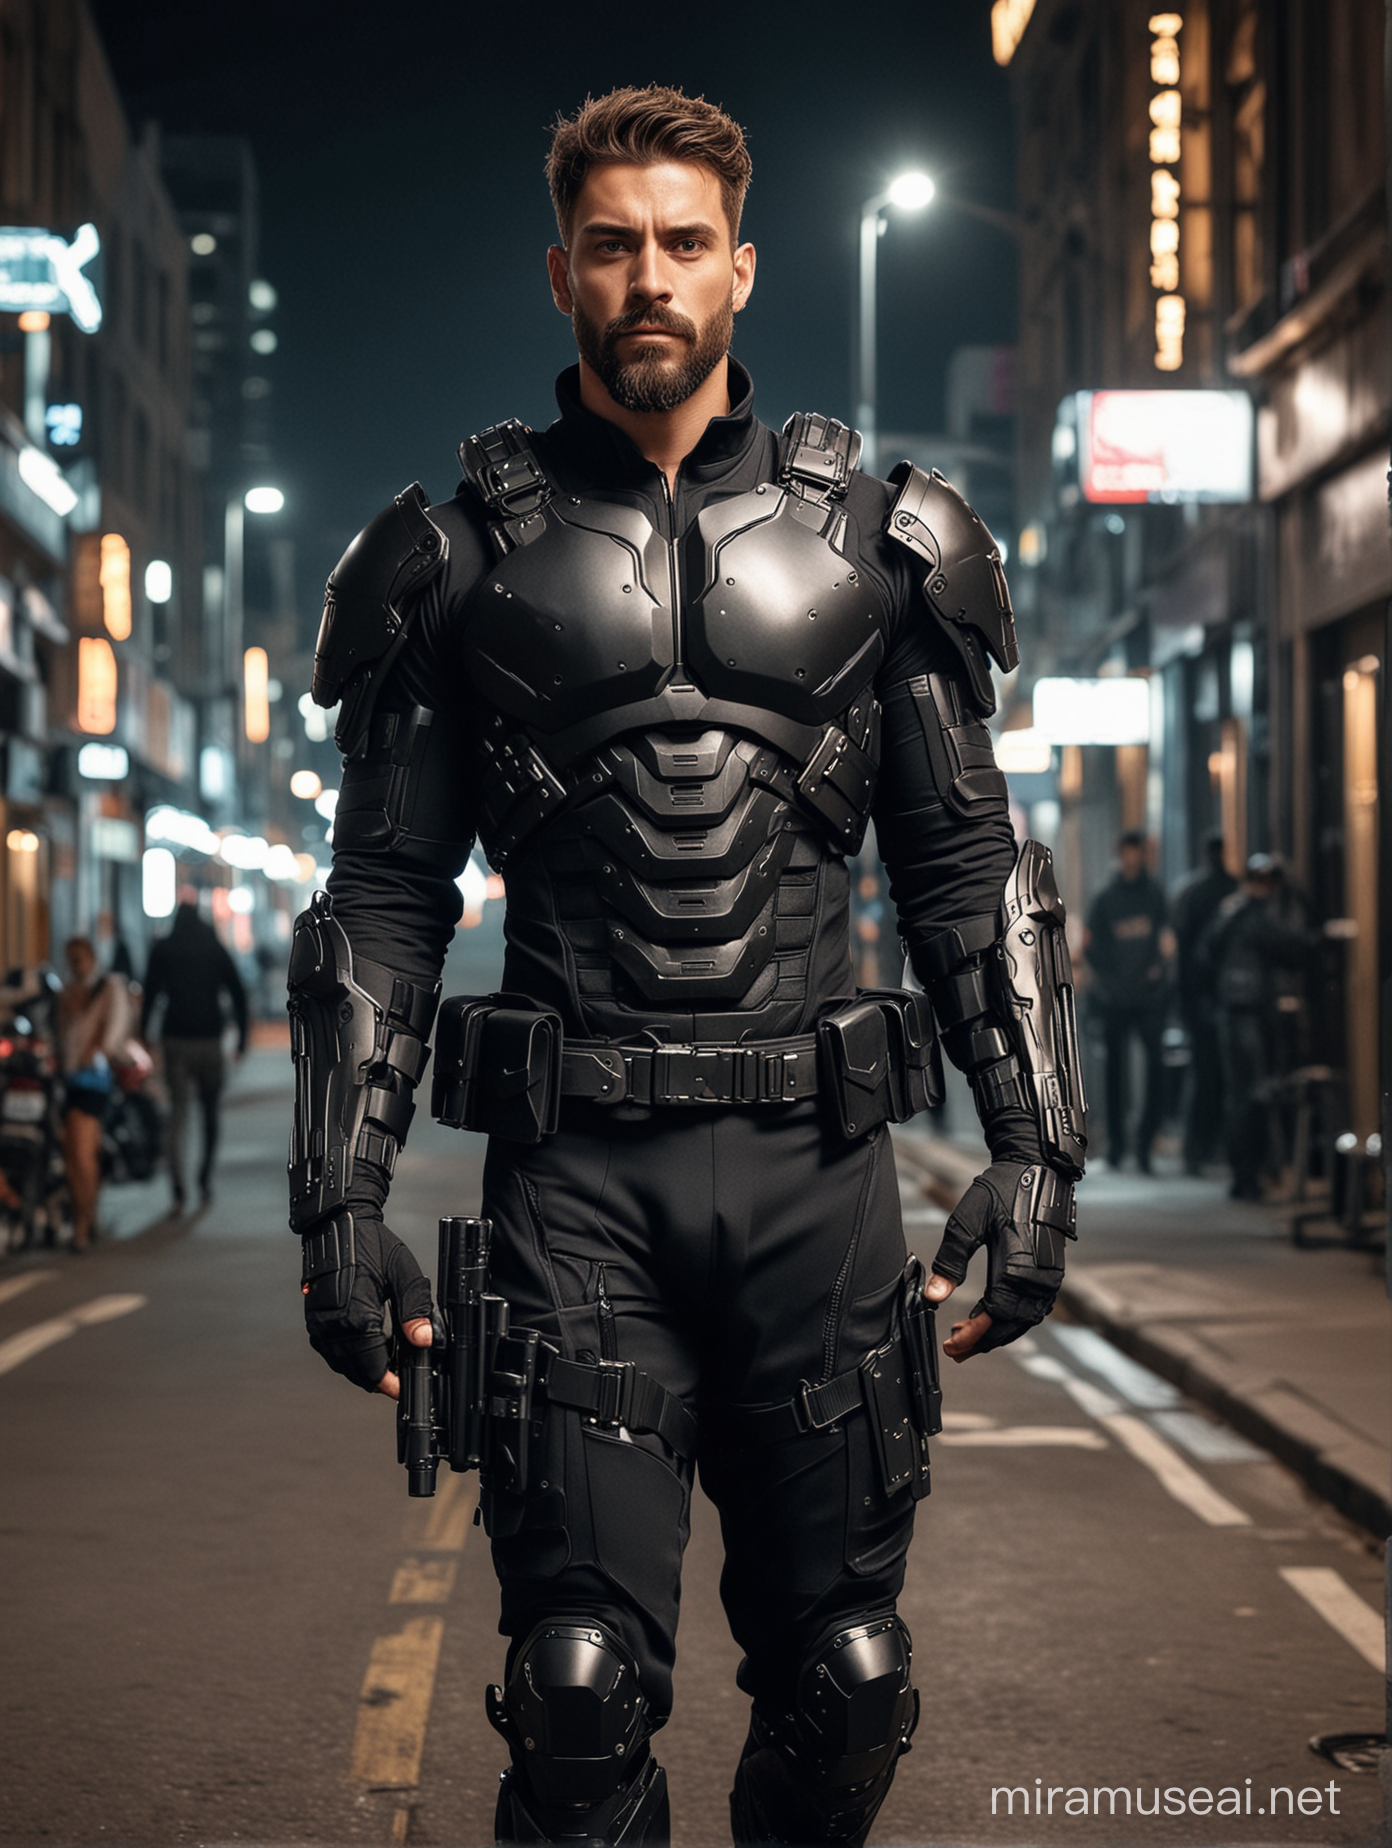 Tall and handsome muscular men with beautiful hairstyle and beard with attractive eyes and Big wide shoulder and chest in sci-fi High Tech black armour suit with firearms walking on street at night 